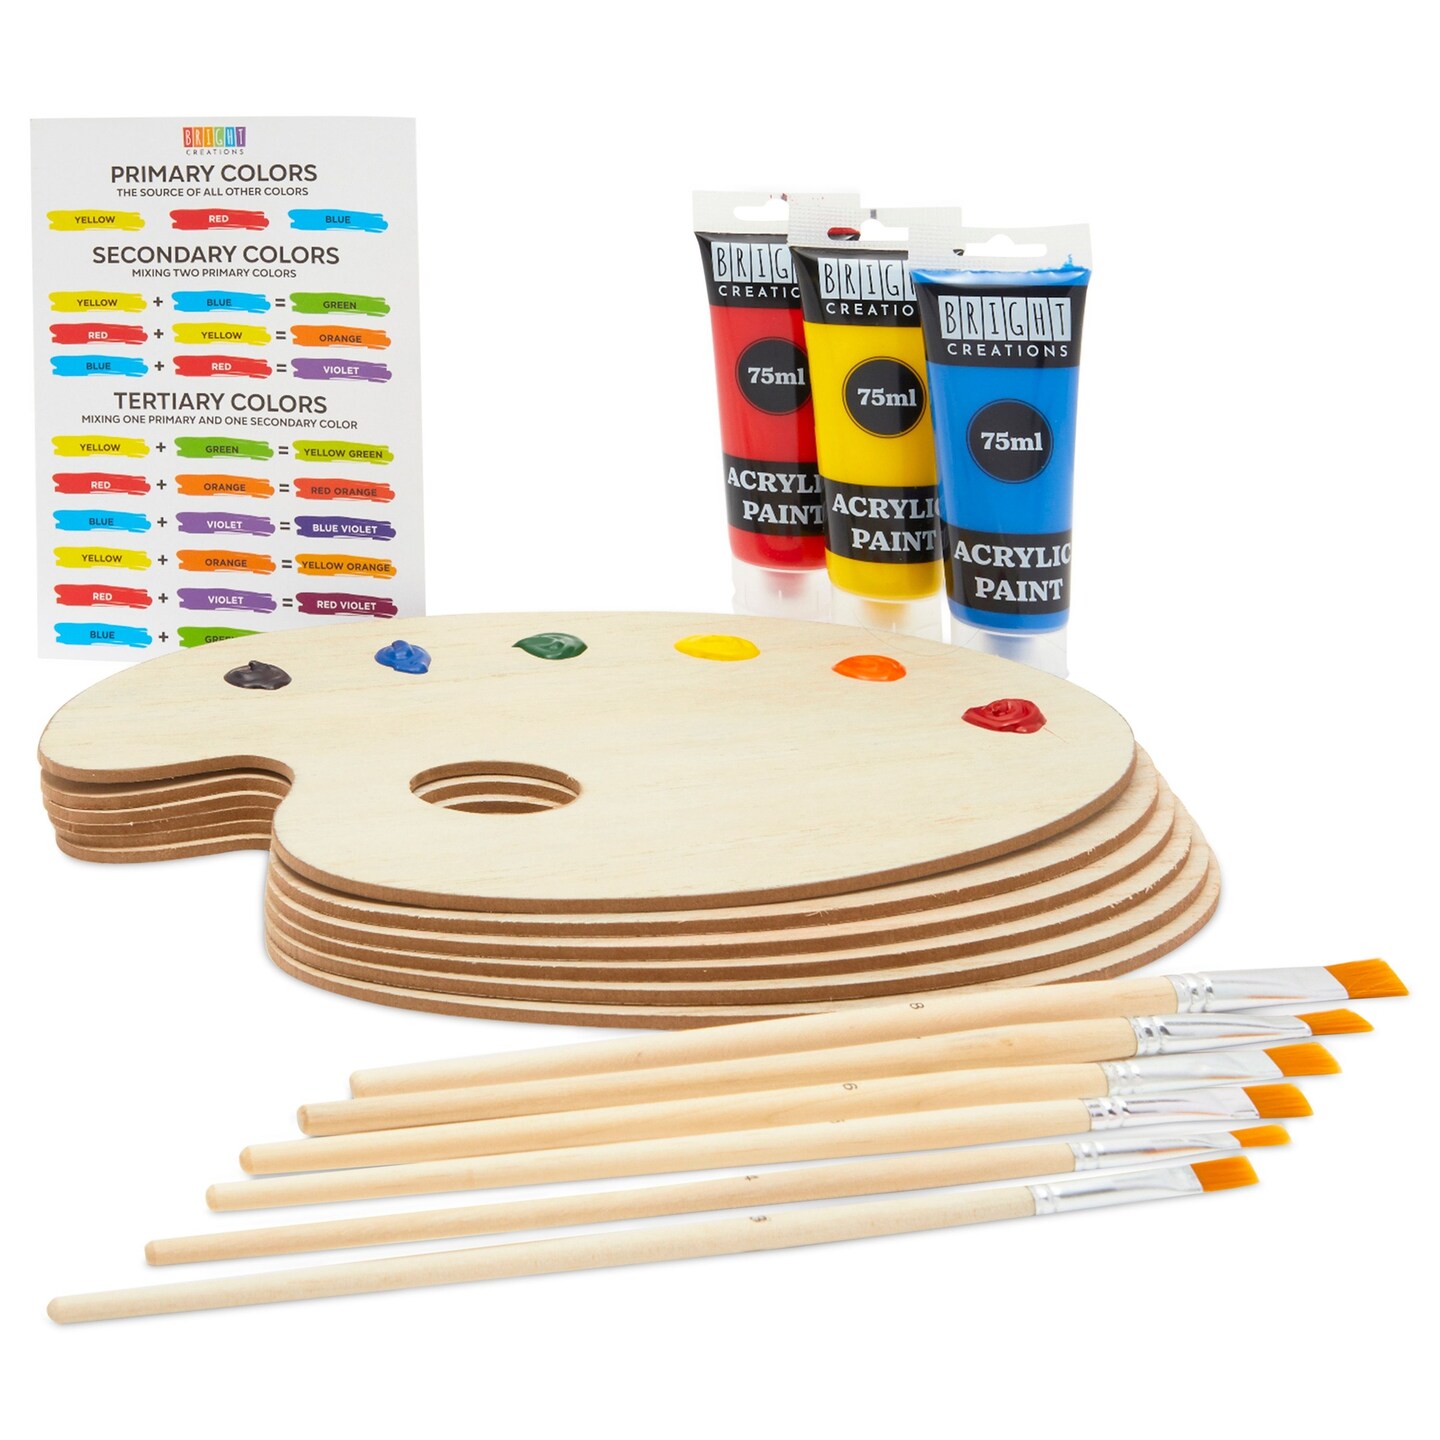 Wooden Oval Painting Palette Kit with Brushes and Acrylic Paint Tubes (15 Pieces)